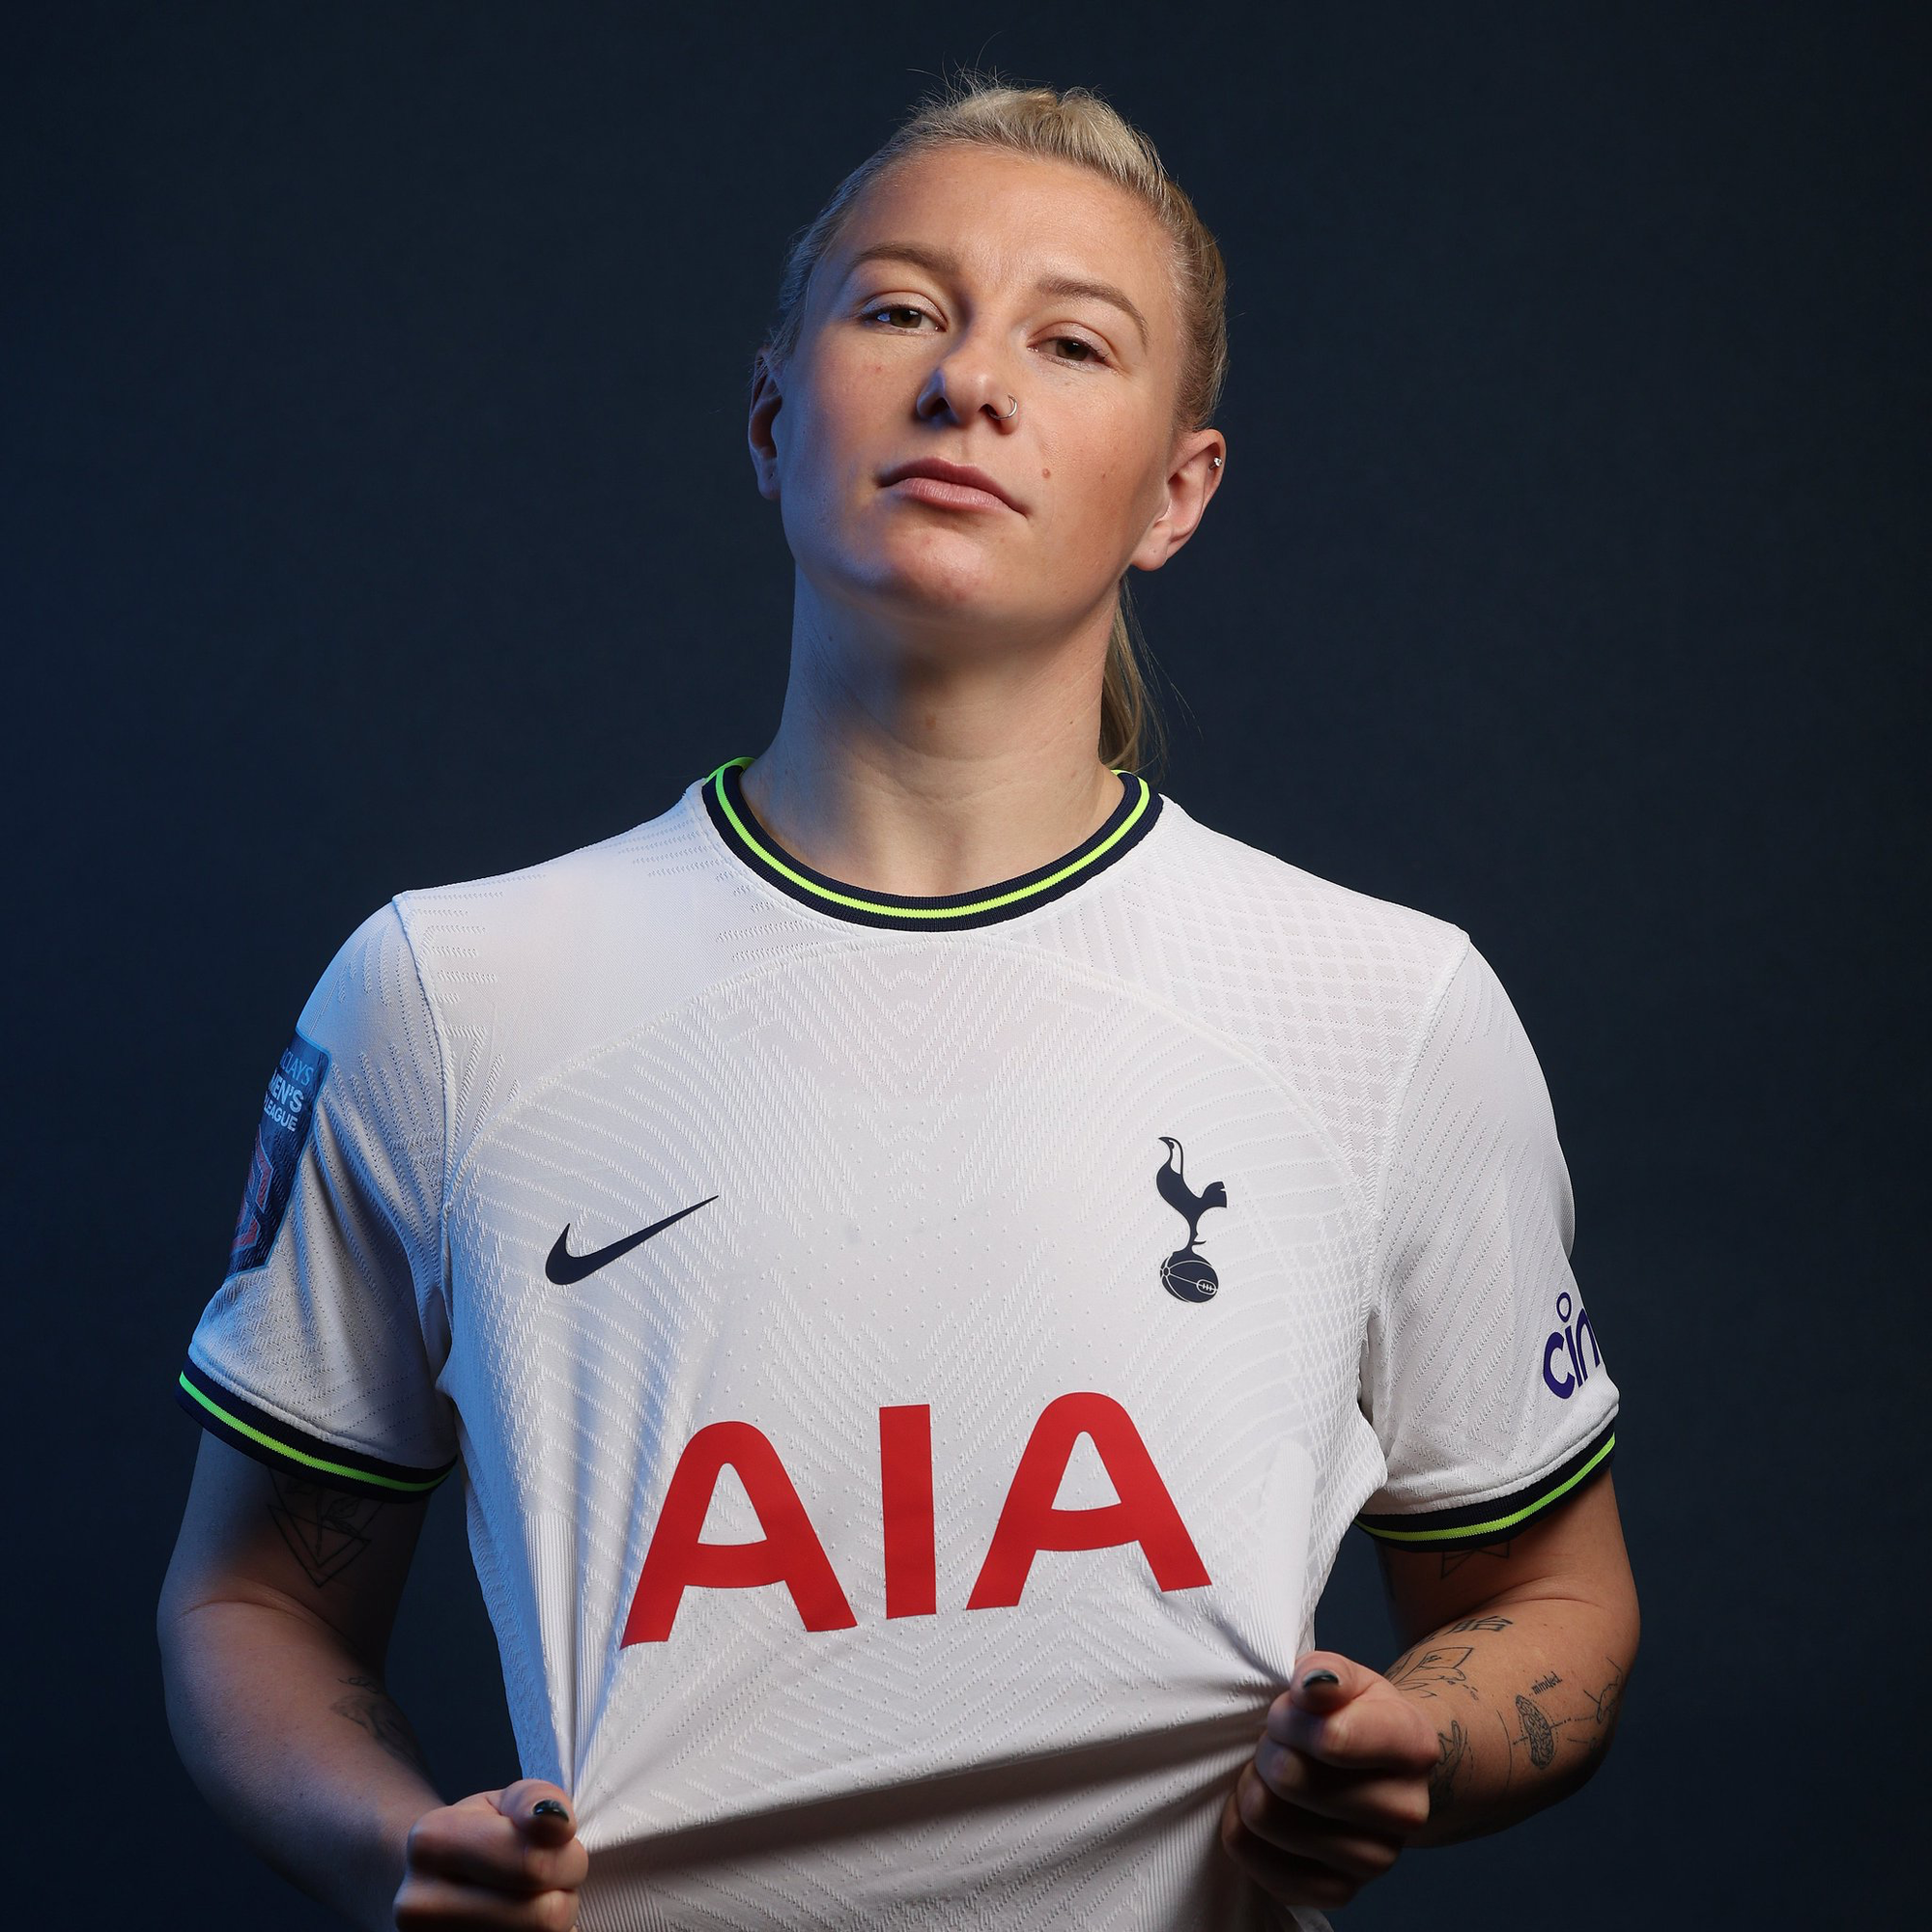 Beth England poses in her new Spurs kit, a determined expression on her face